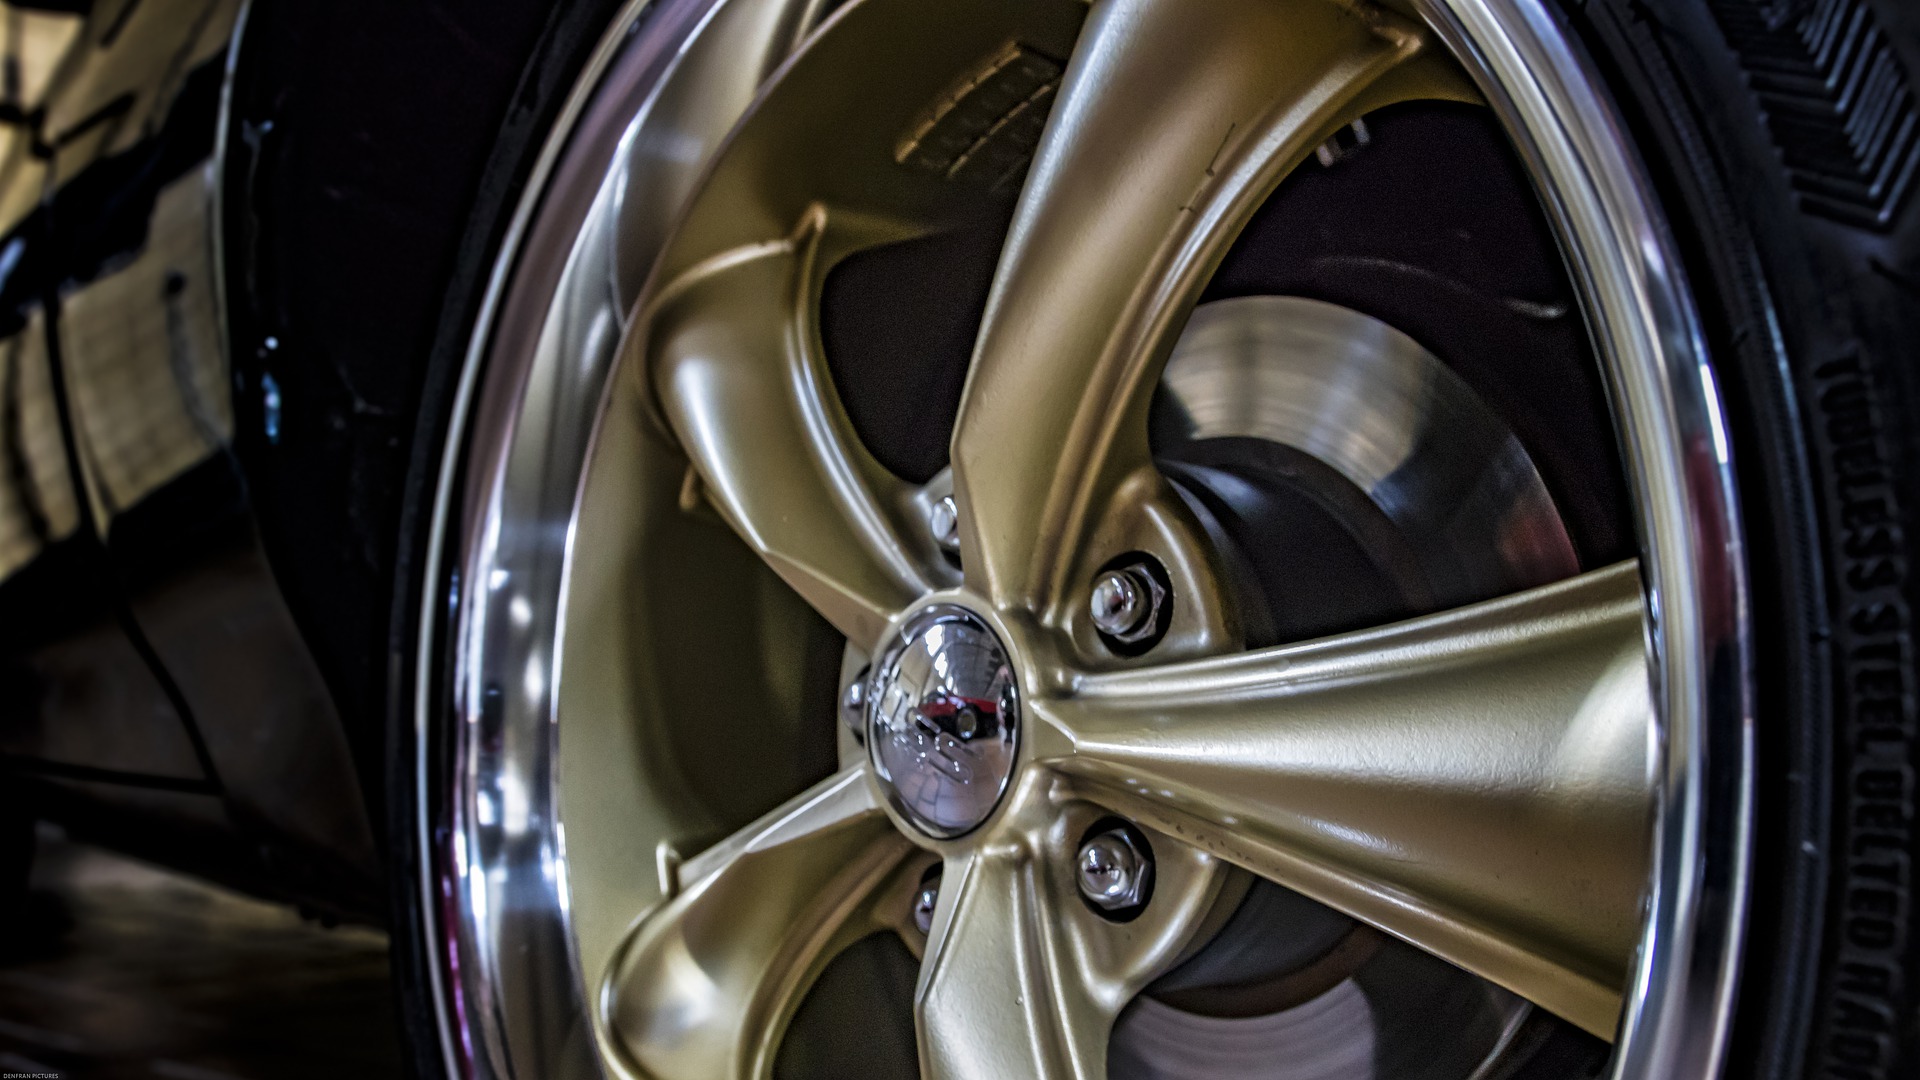 Rim with golden and silver metallic coatings